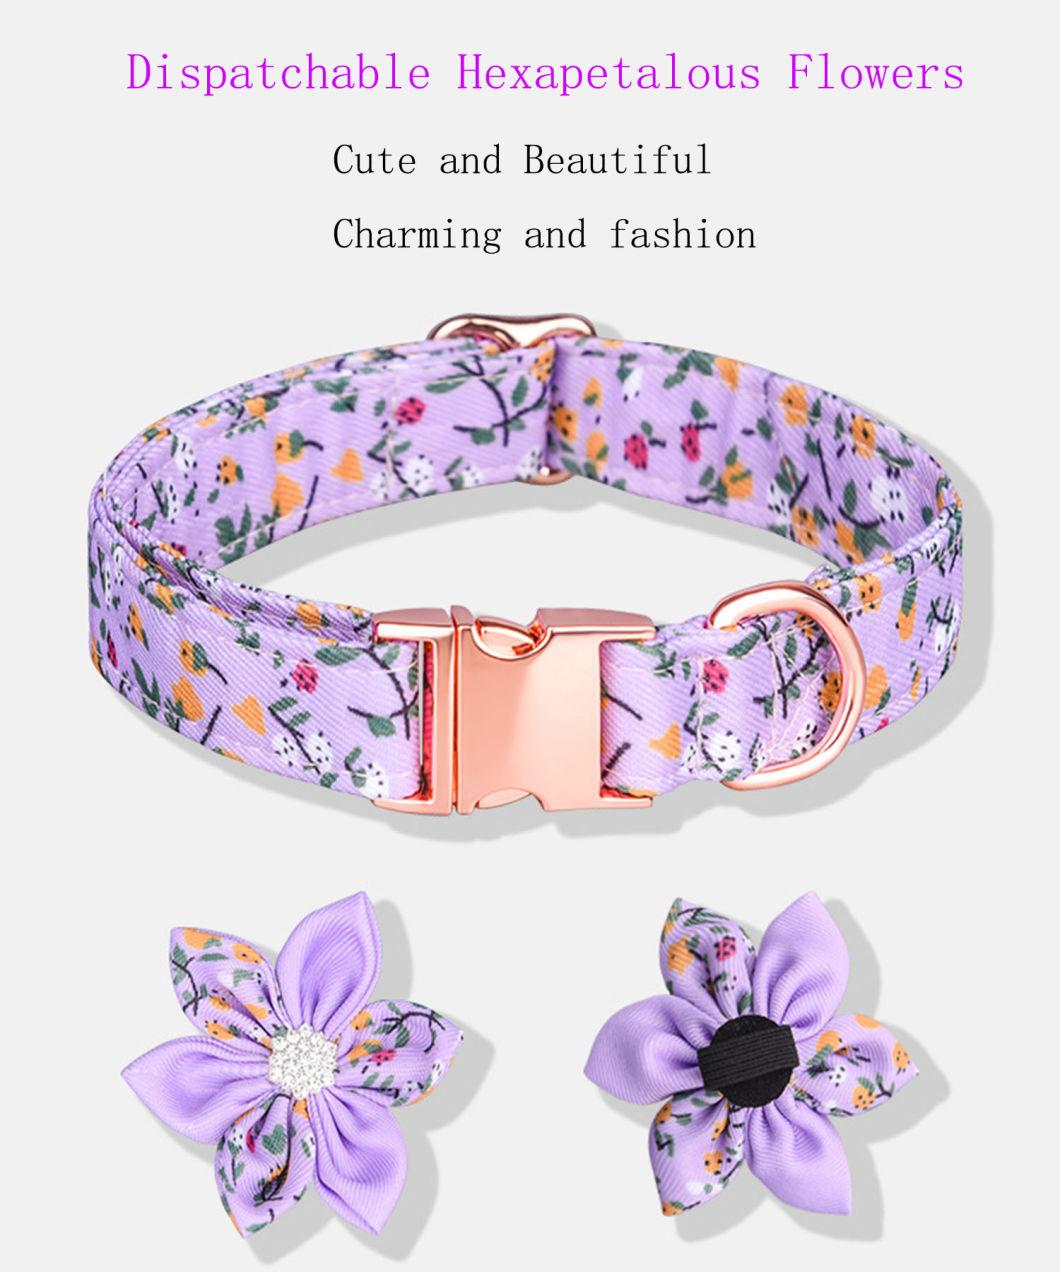 Dog Soft Floral Pattern Cute Dog Collar with Safety Metal Buckle